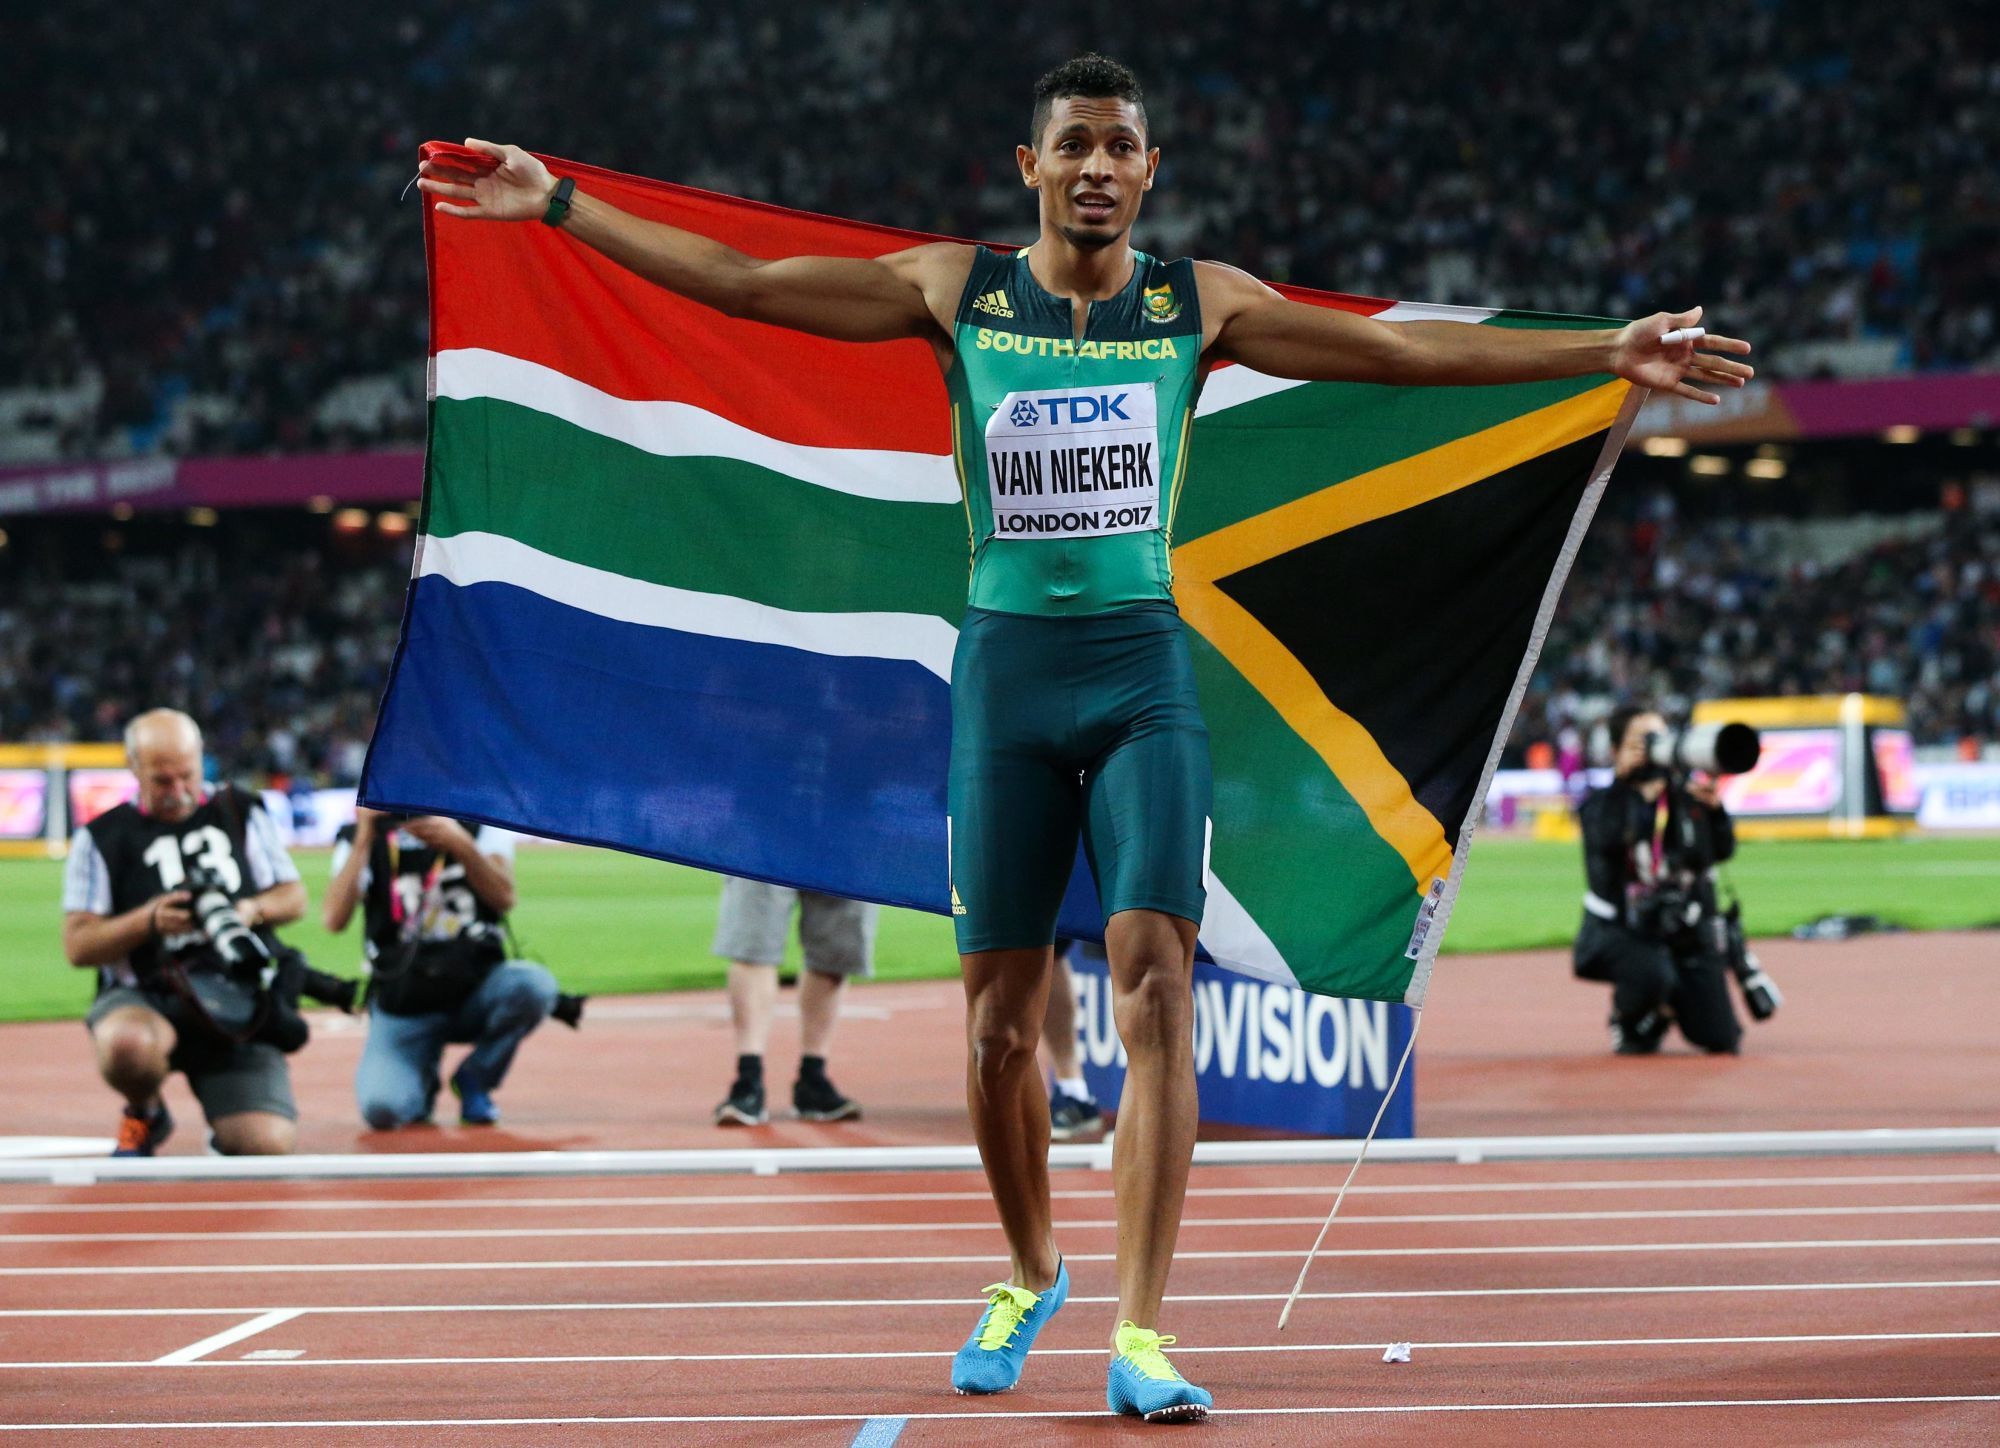 South Africa's Wayde Van Niekerk celebrates taking silver in the Men's 200m Final during day seven of the 2017 IAAF World Championships at the London Stadium on August 10, 2017.
Photo by Jonathan Brady / PA Images / Icon Sport *** Local Caption ***